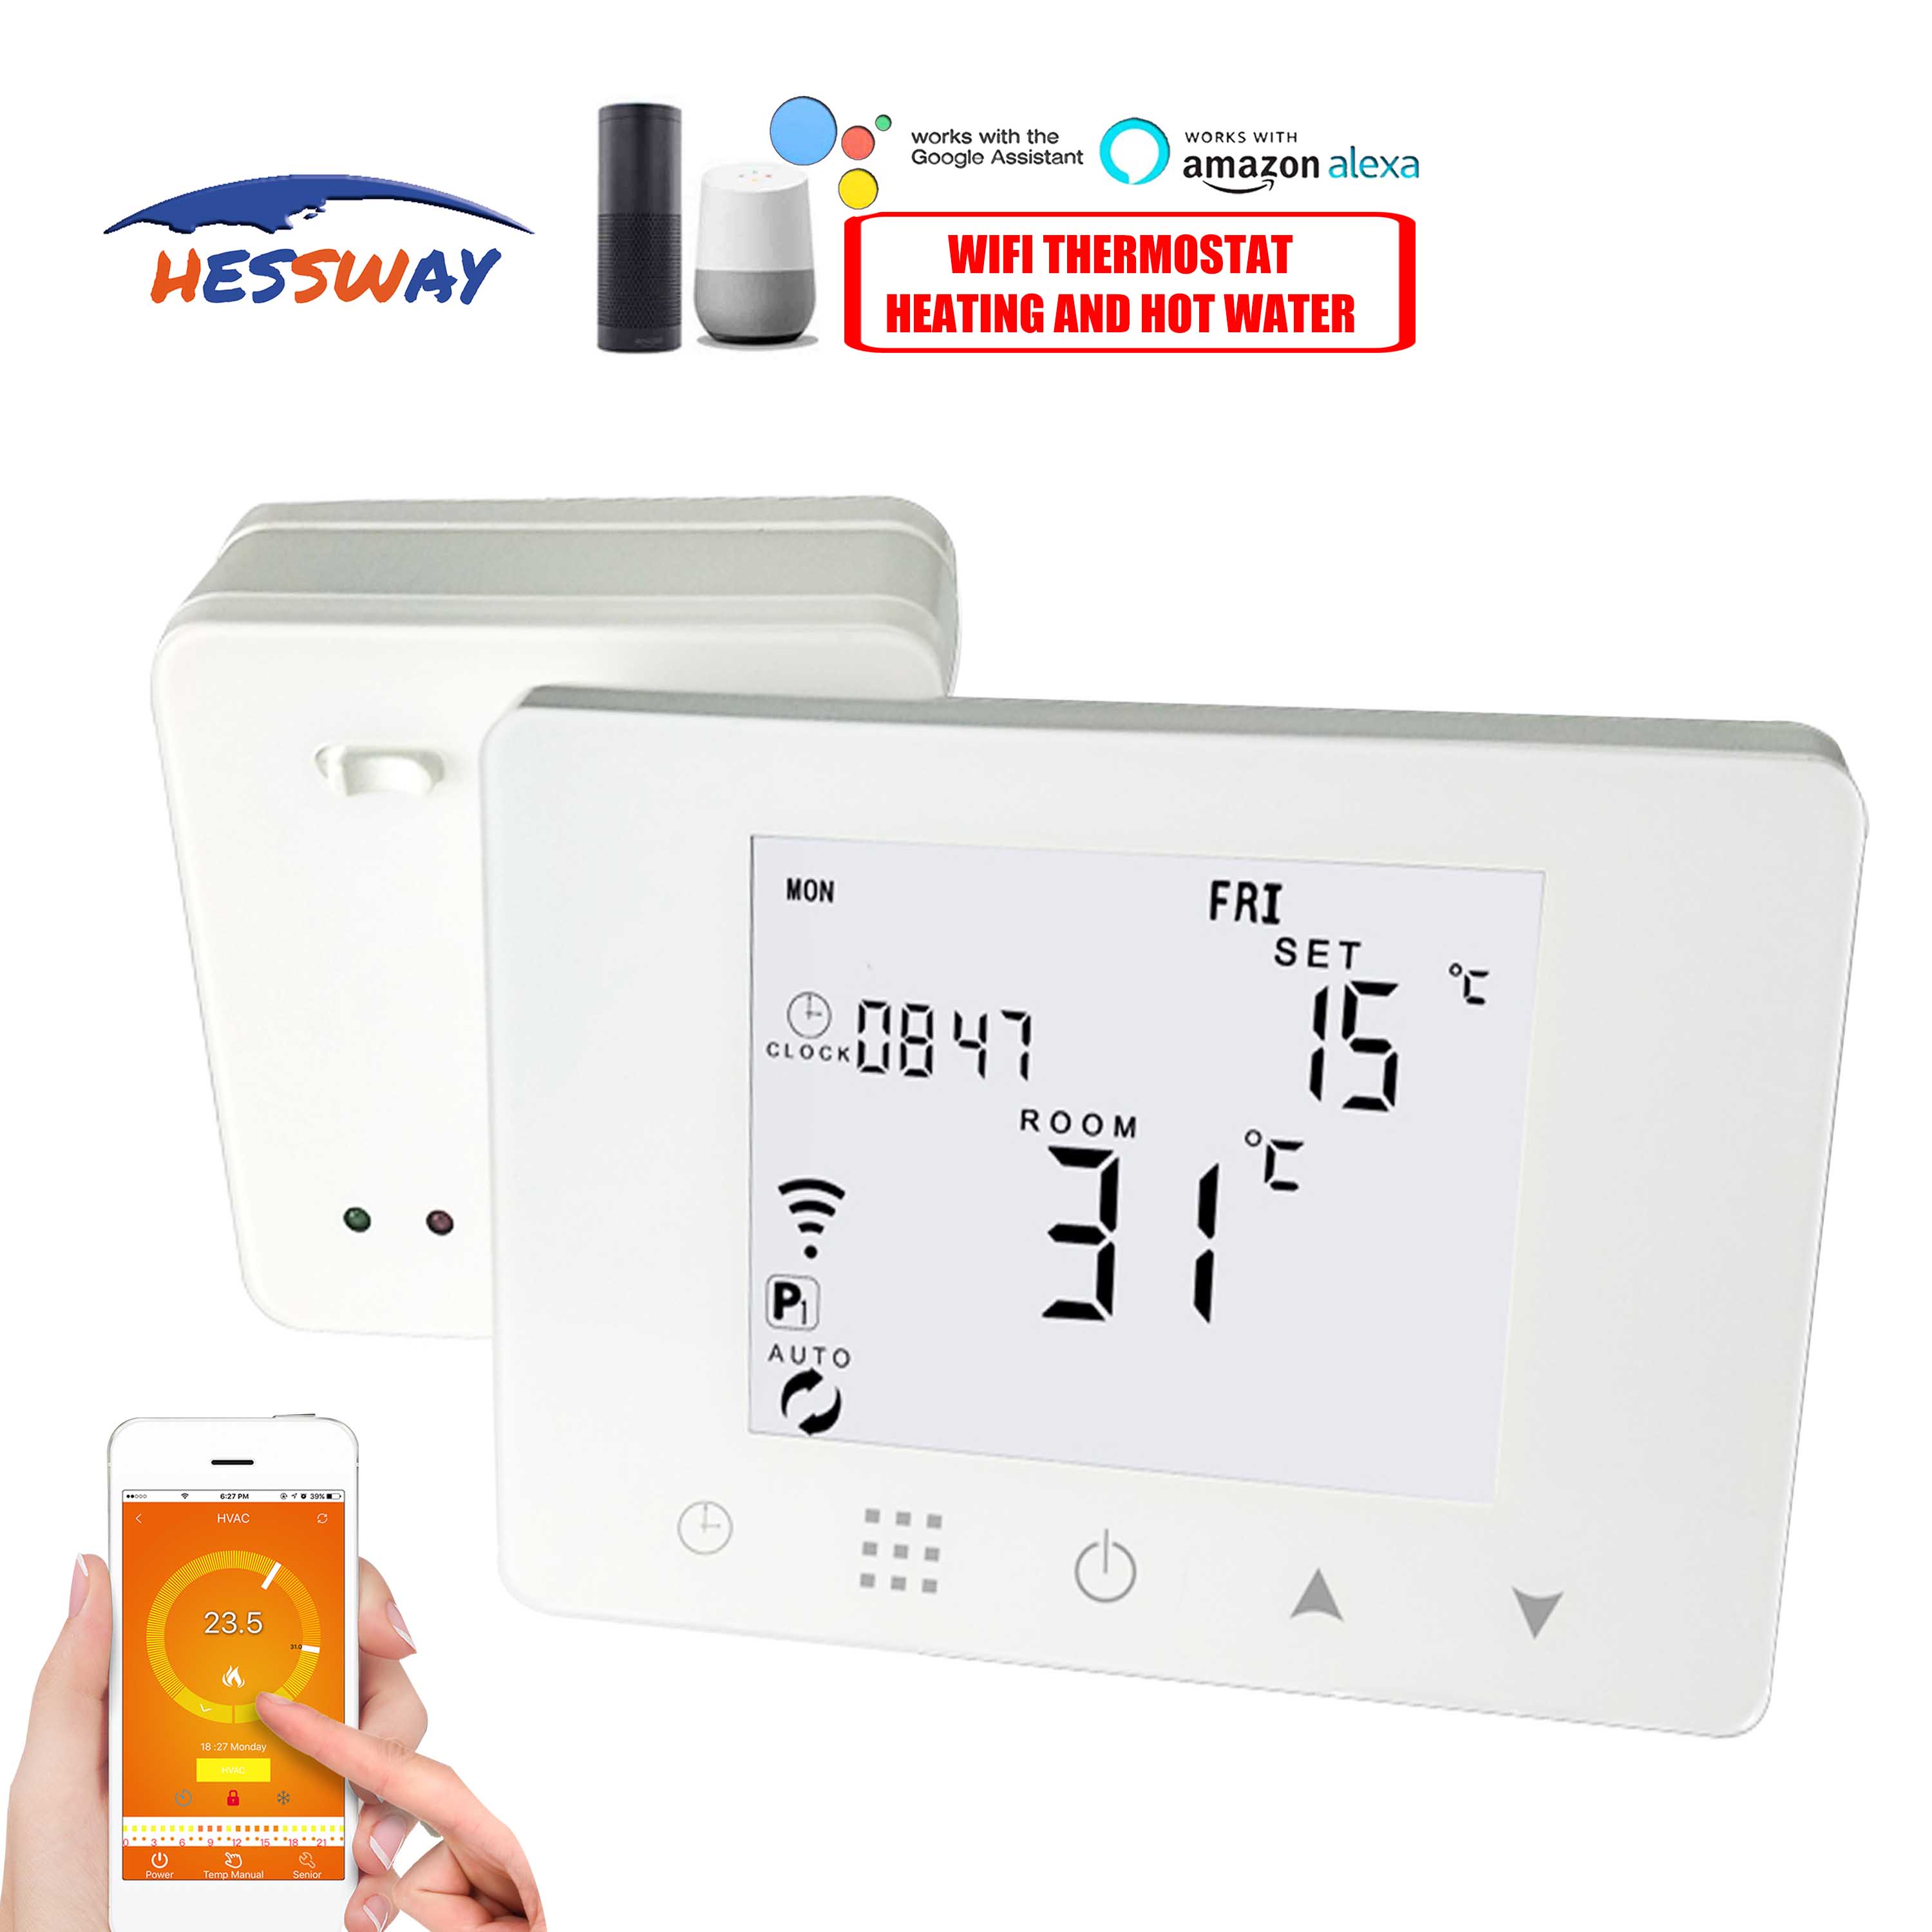 433Mhz RF&Wifi Thermostat Heating Dual Sensor Temperature Controller for 16A Substrate Heater